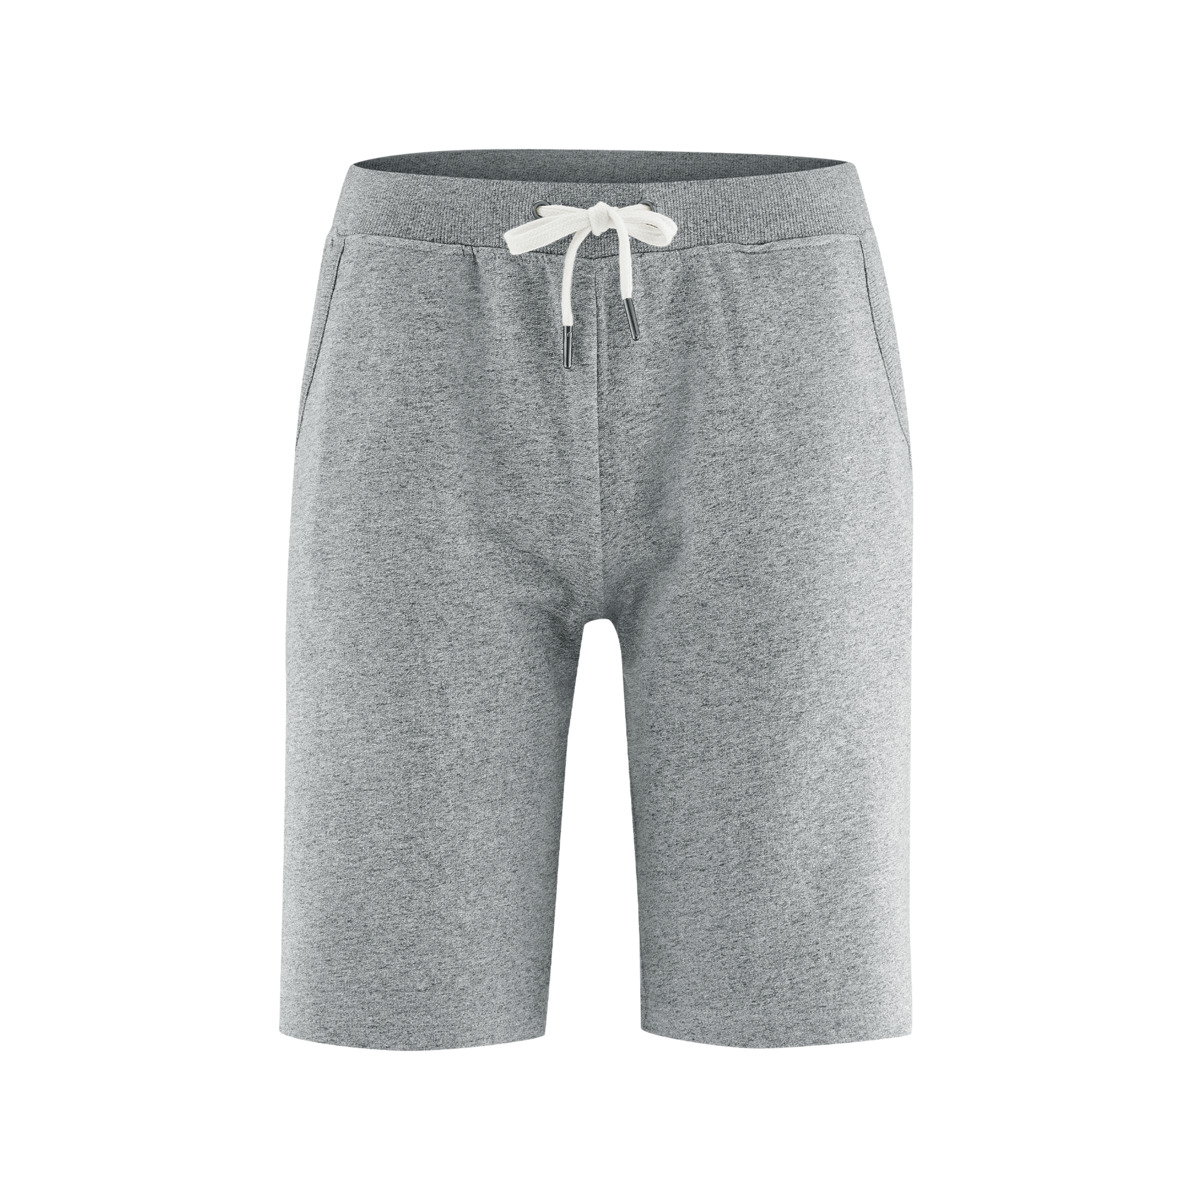 Gris Shorty, INA